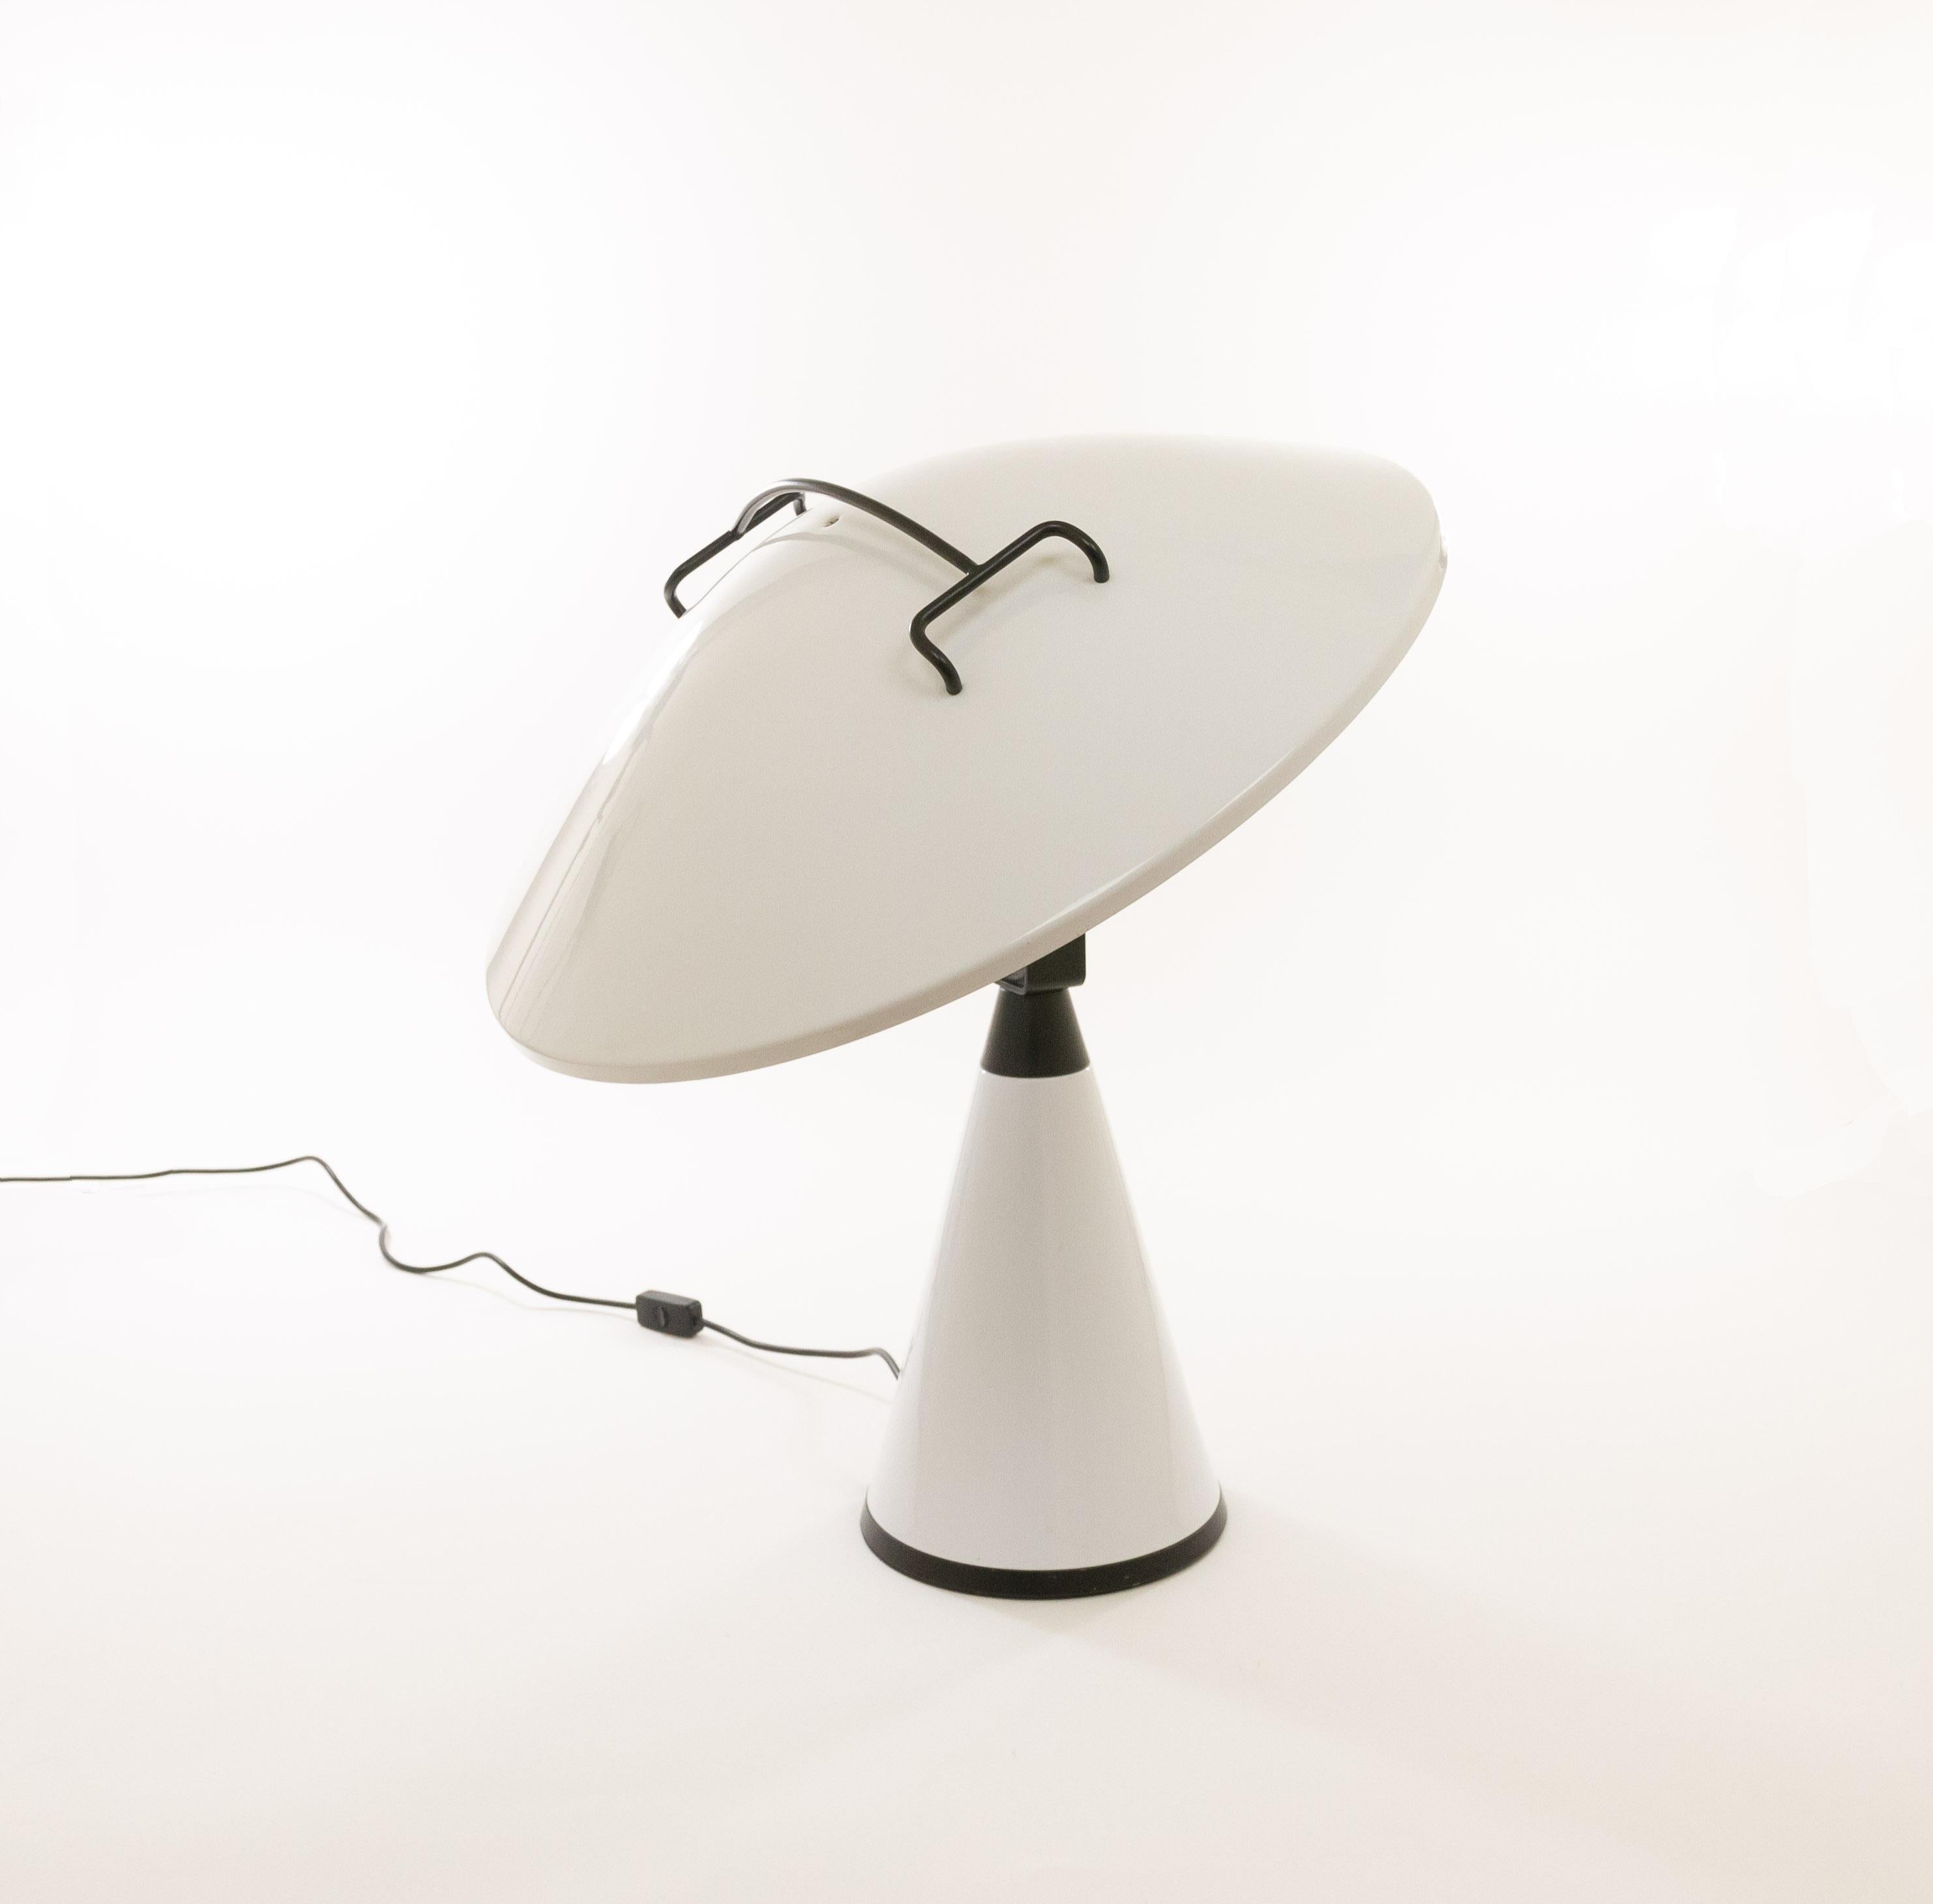 Impressive model 676 Radar table or floor lamp designed by Elio Martinelli and manufactured by Martinelli Luce.

The Radar lamp consists of a cone-shaped base and a large white metal shade with a black handle on top. A special feature of the lamp